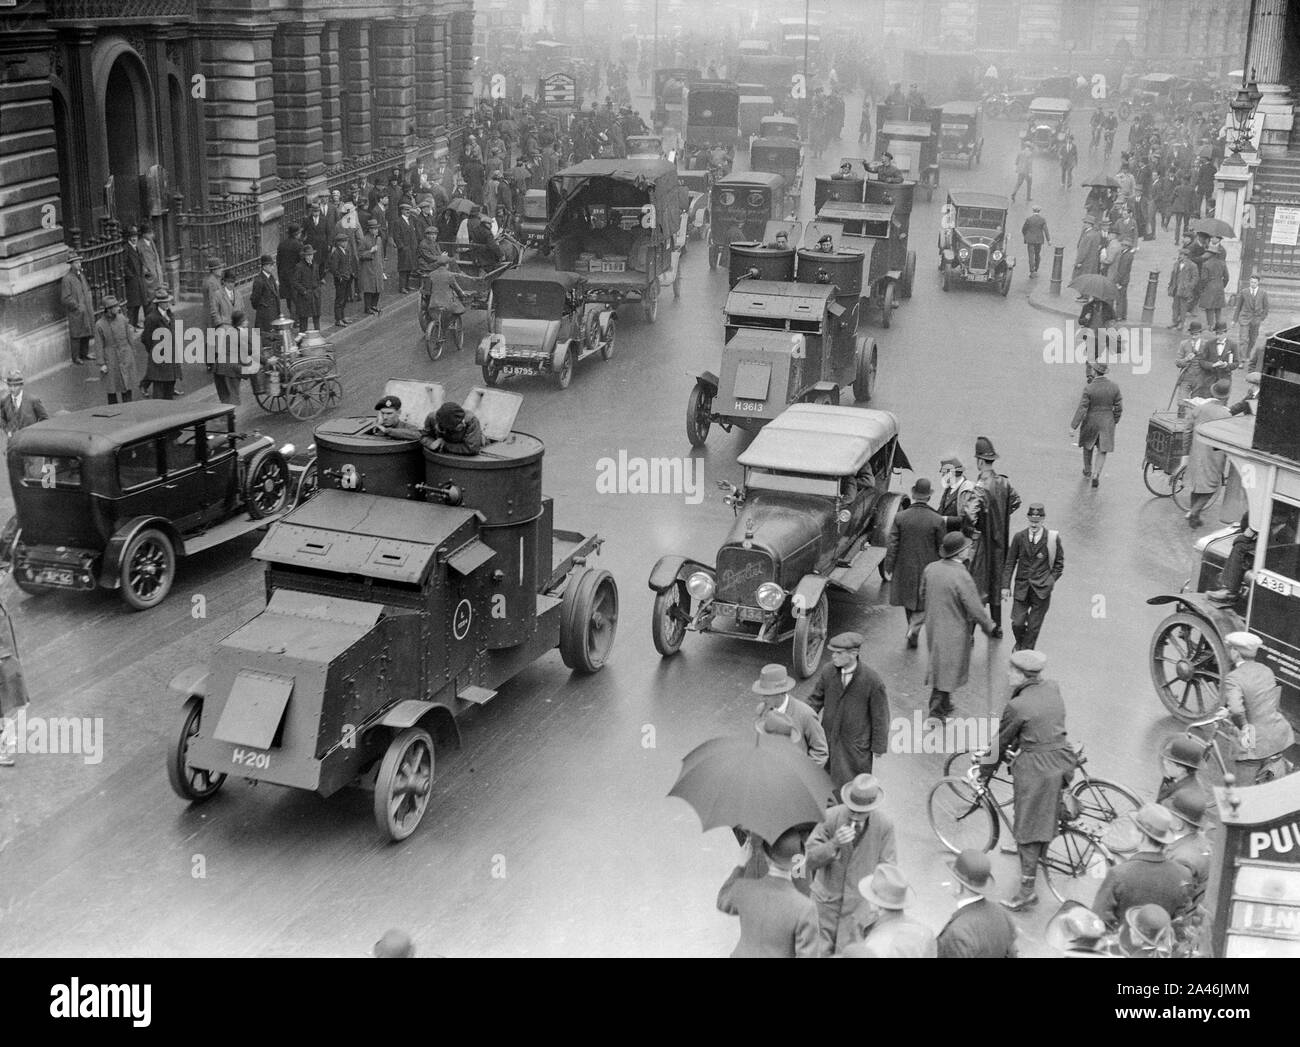 12th May 1926. London, England. Troops in armoured cars on the streets of London in an attempt to keep control and maintain basic services, during the General Strike in the UK, that lasted from 3rd to 12th may 1926. Stock Photo